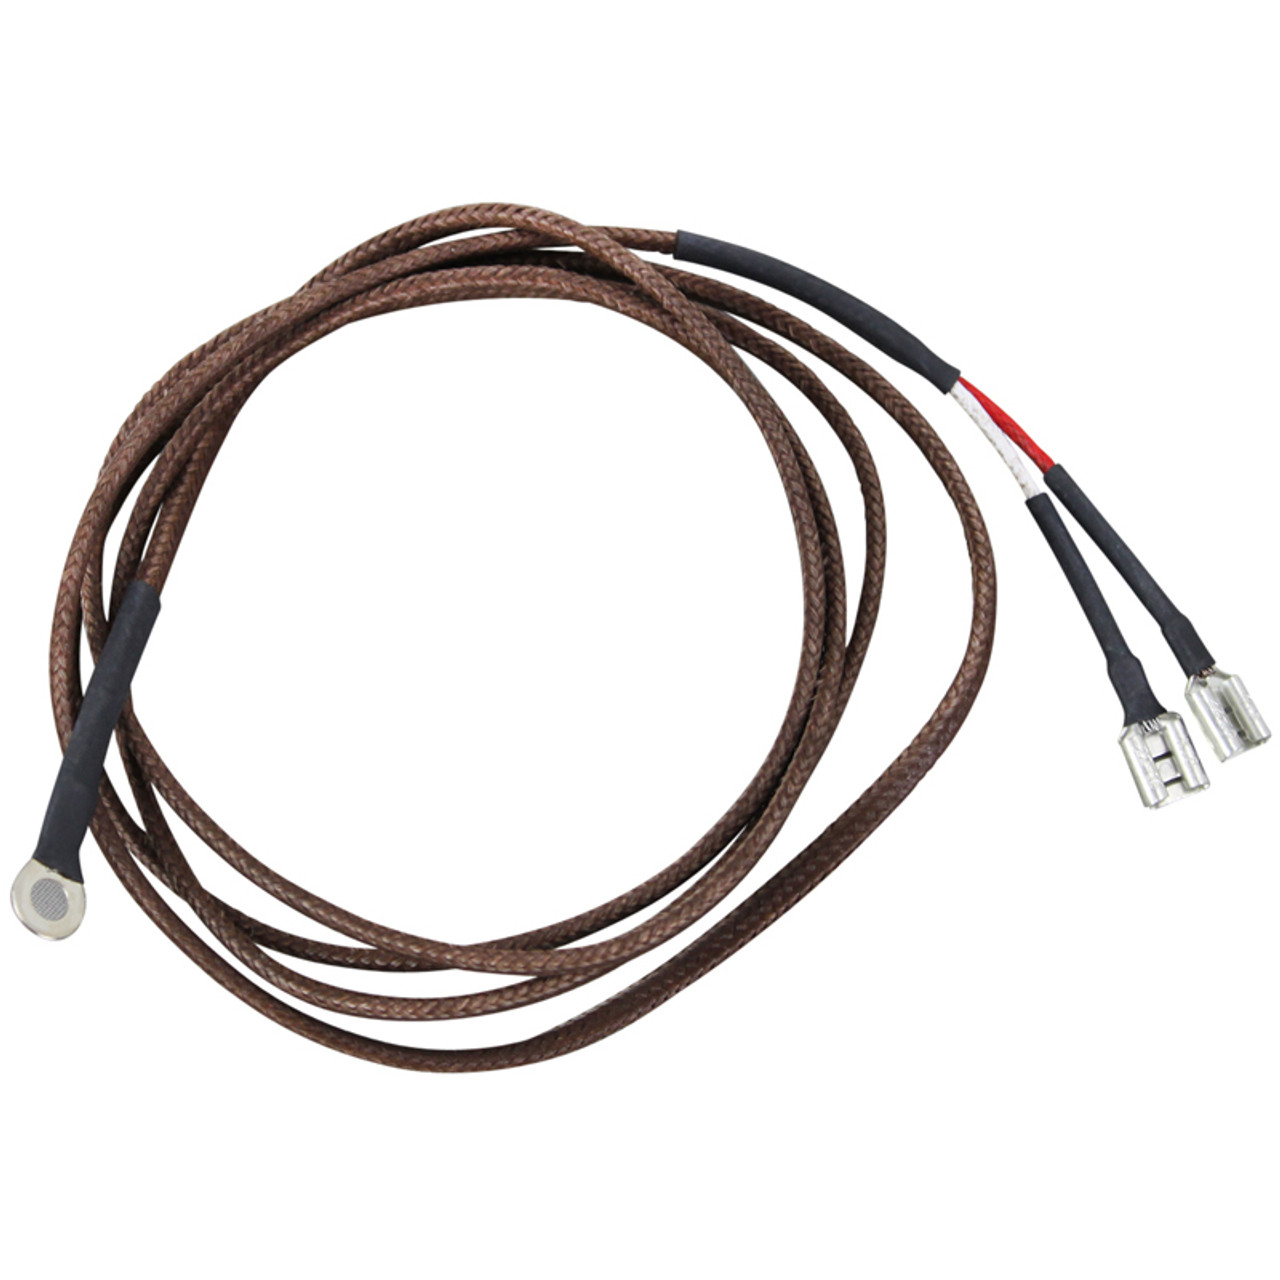 MARKET FORGE 97-6156 THERMOCOUPLE